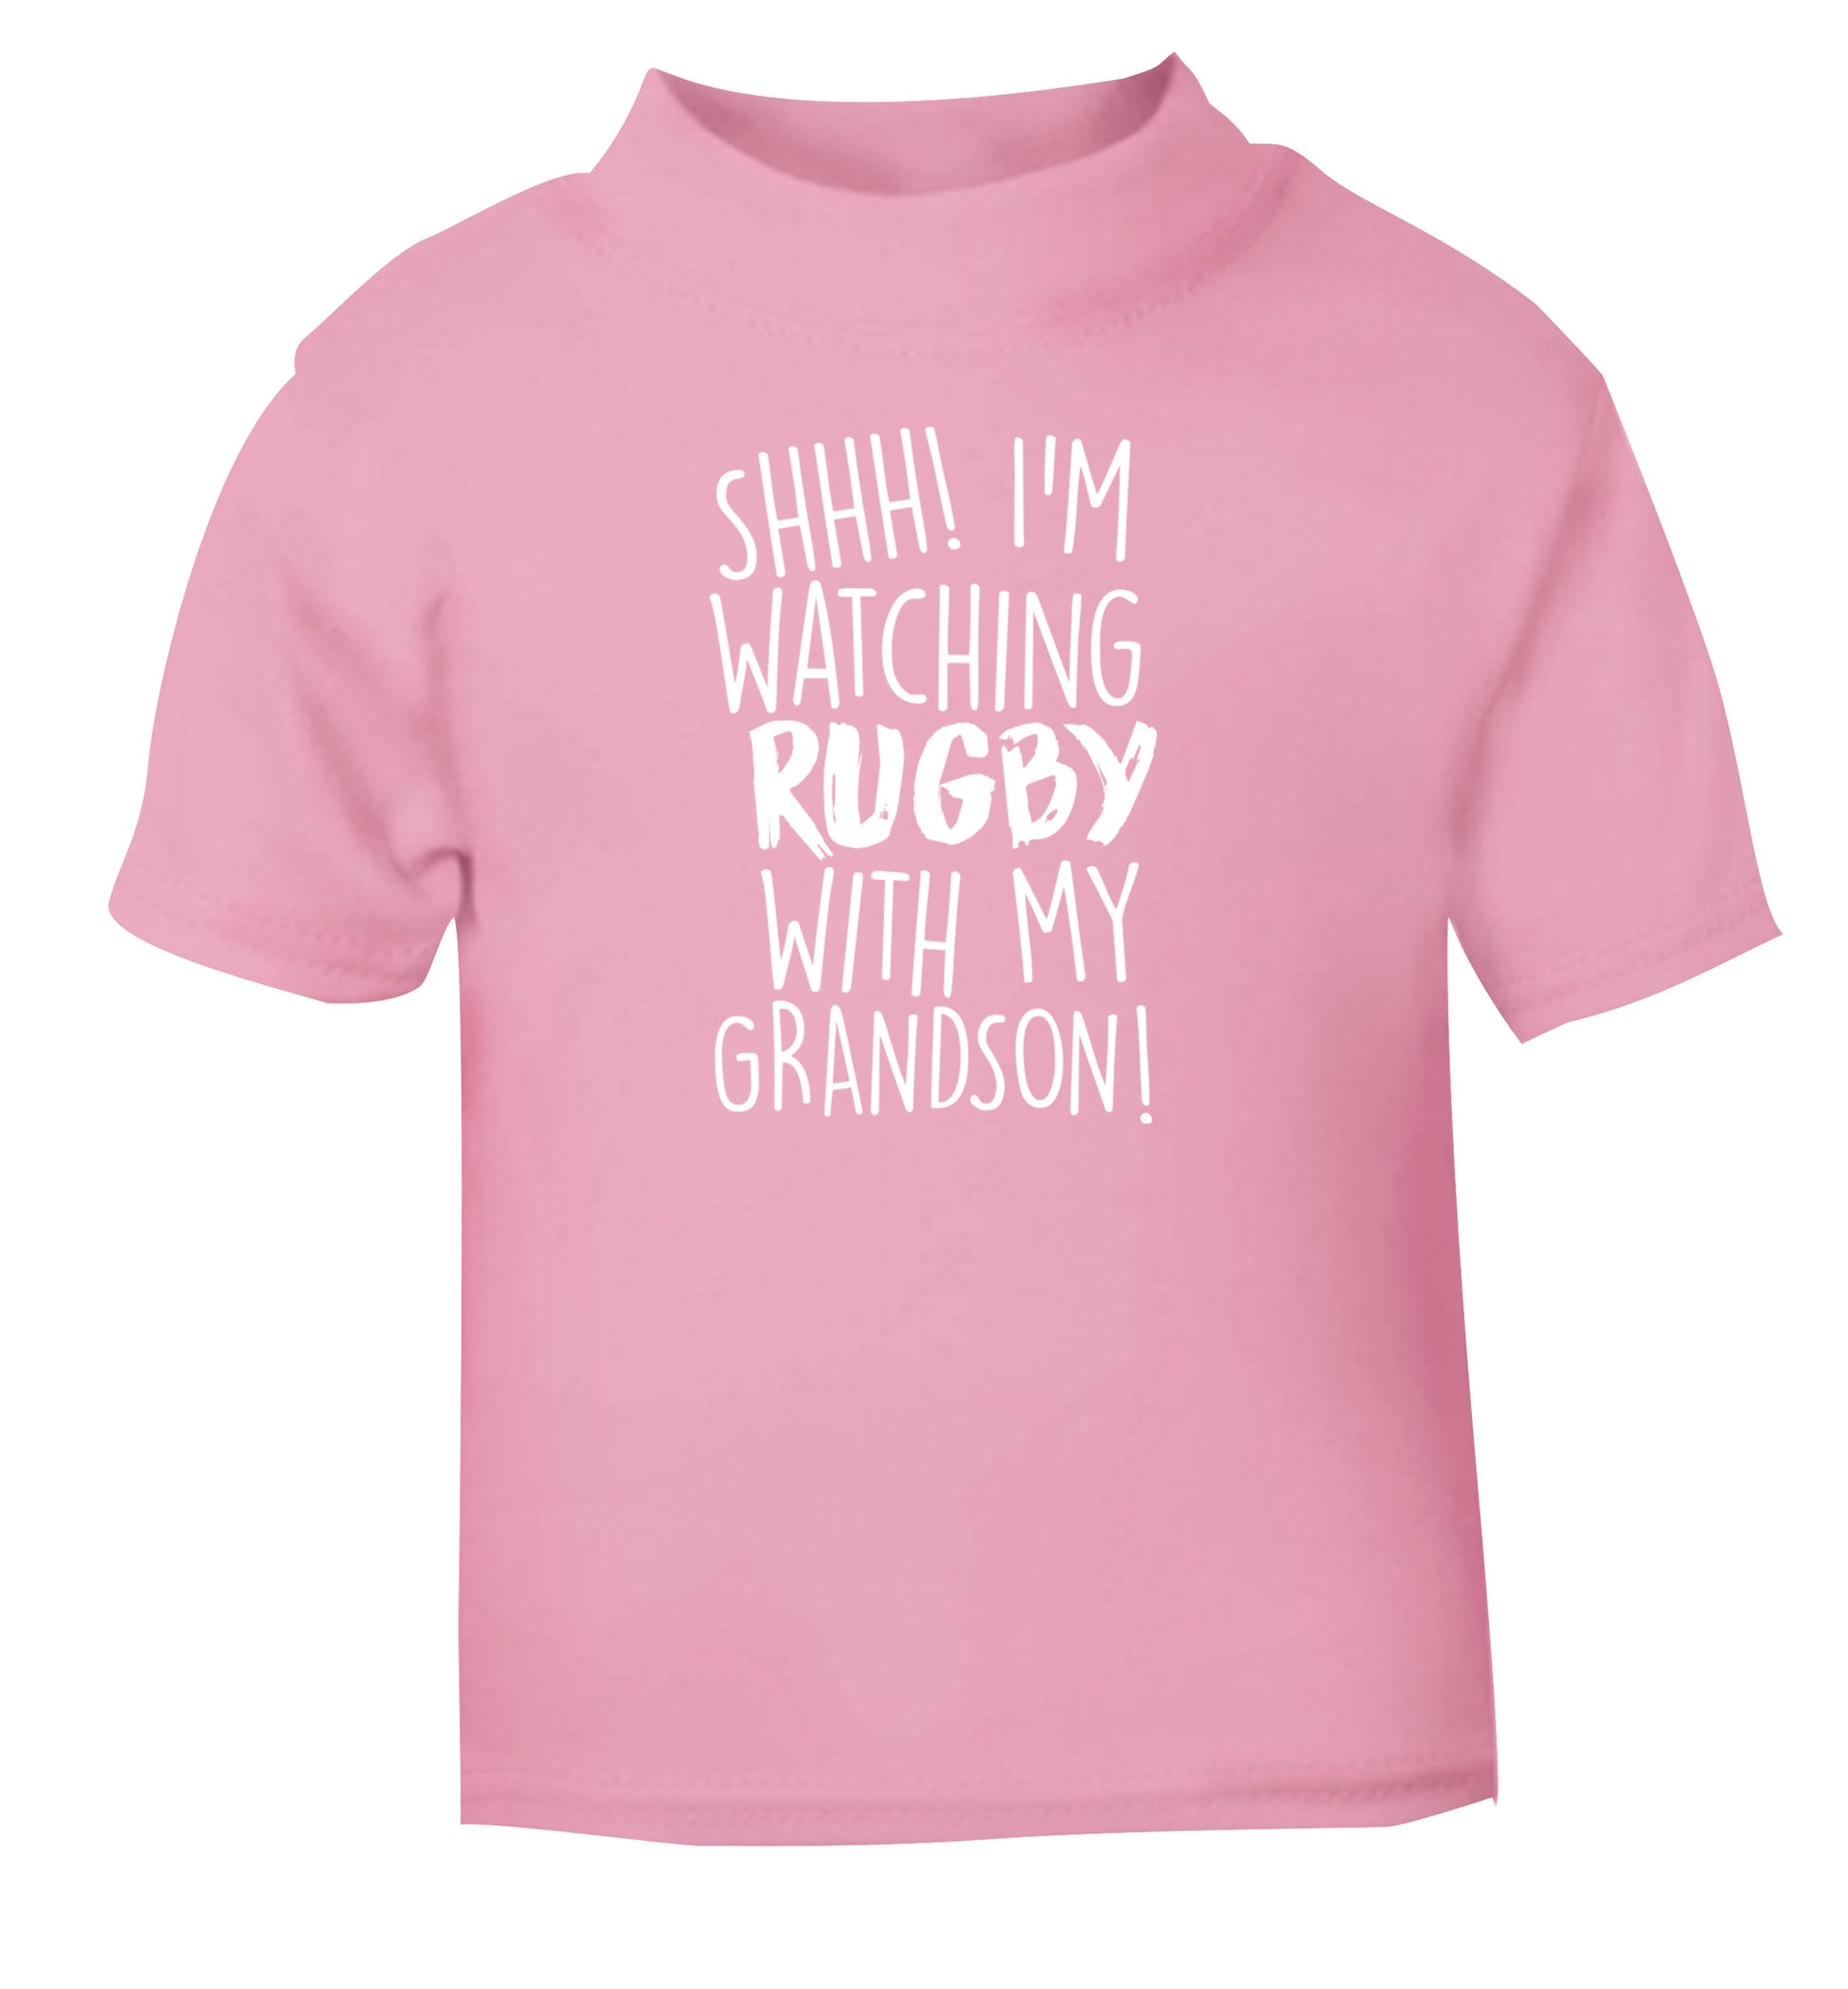 Shh I'm watching rugby with my grandson light pink Baby Toddler Tshirt 2 Years